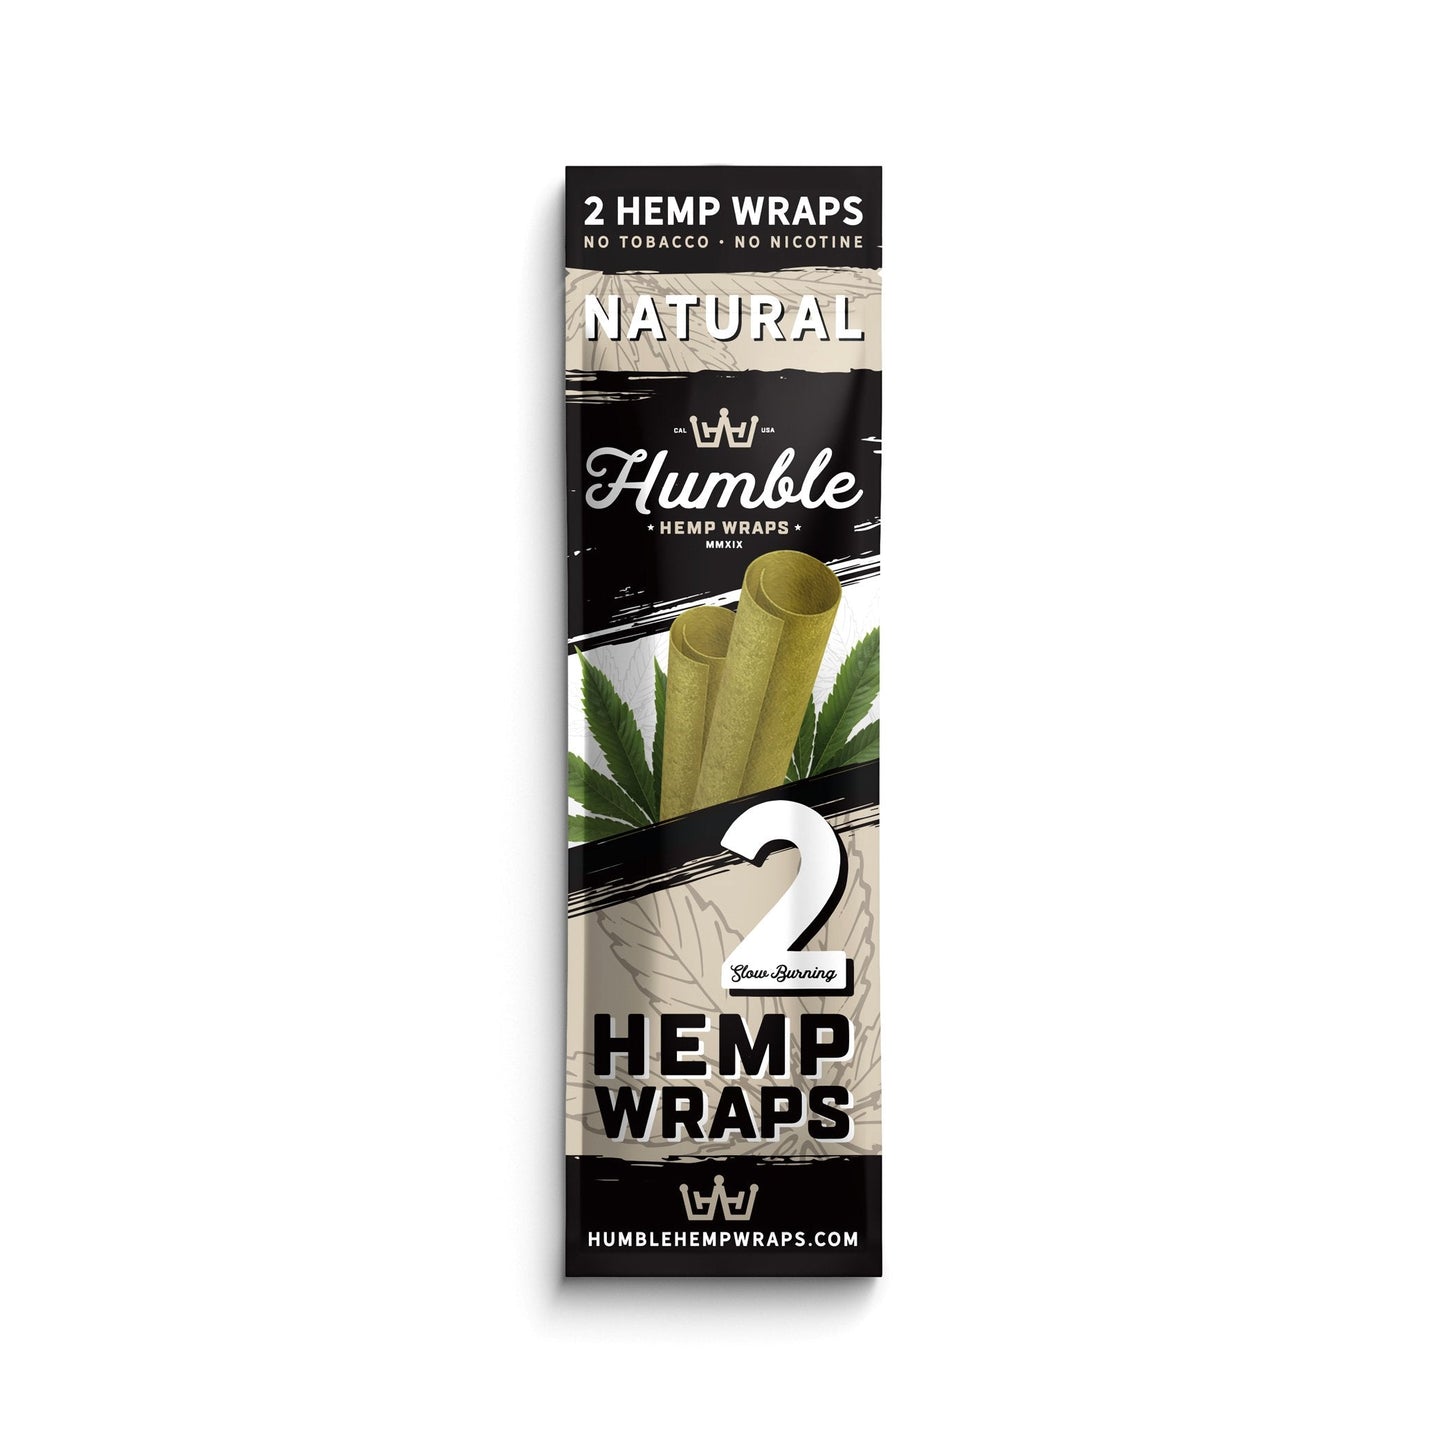 Humble Hemp Wraps - Natural Flavor - 25 Pack Flower Power Packages 